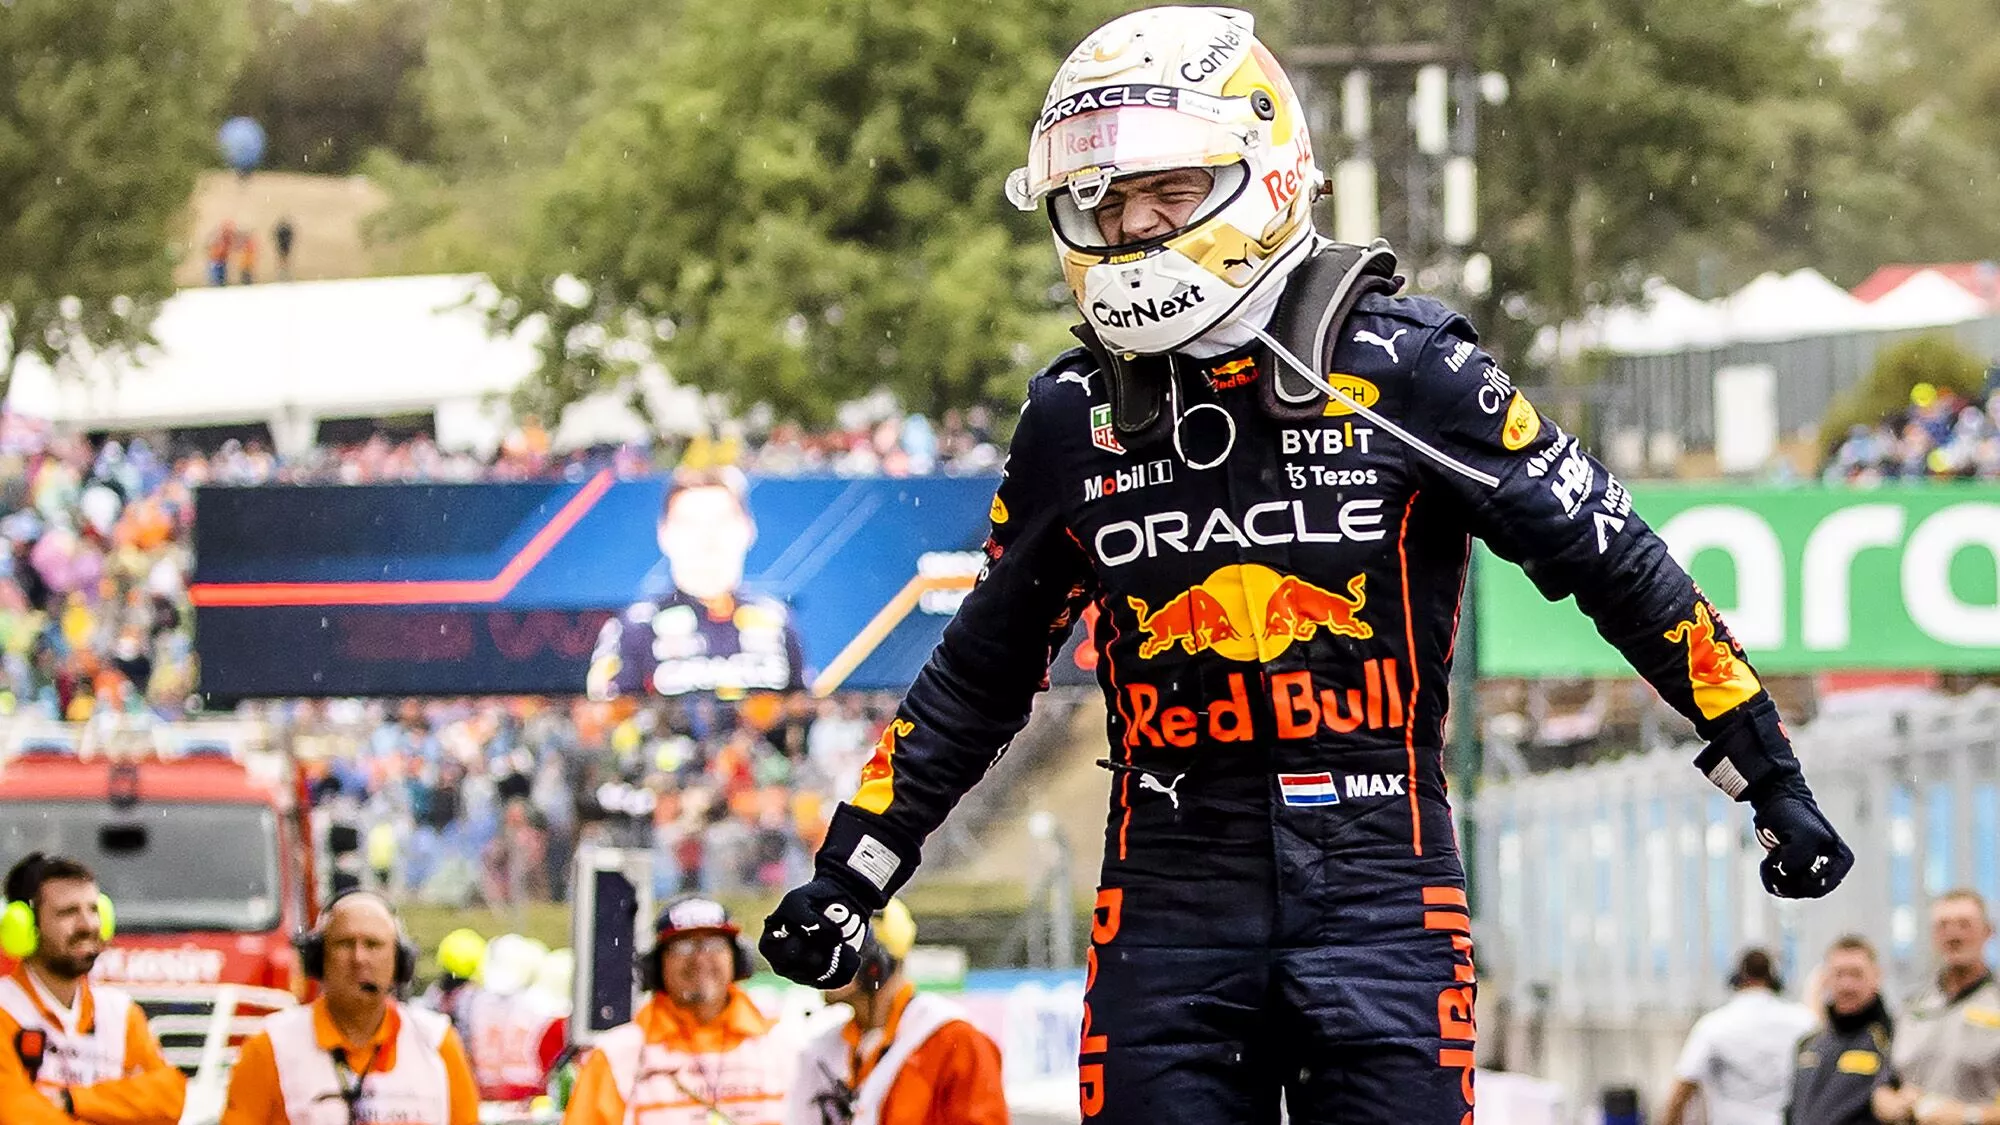 Max Spins and Wins in Hungary, Ferrari mess up their strategy – Formula 1